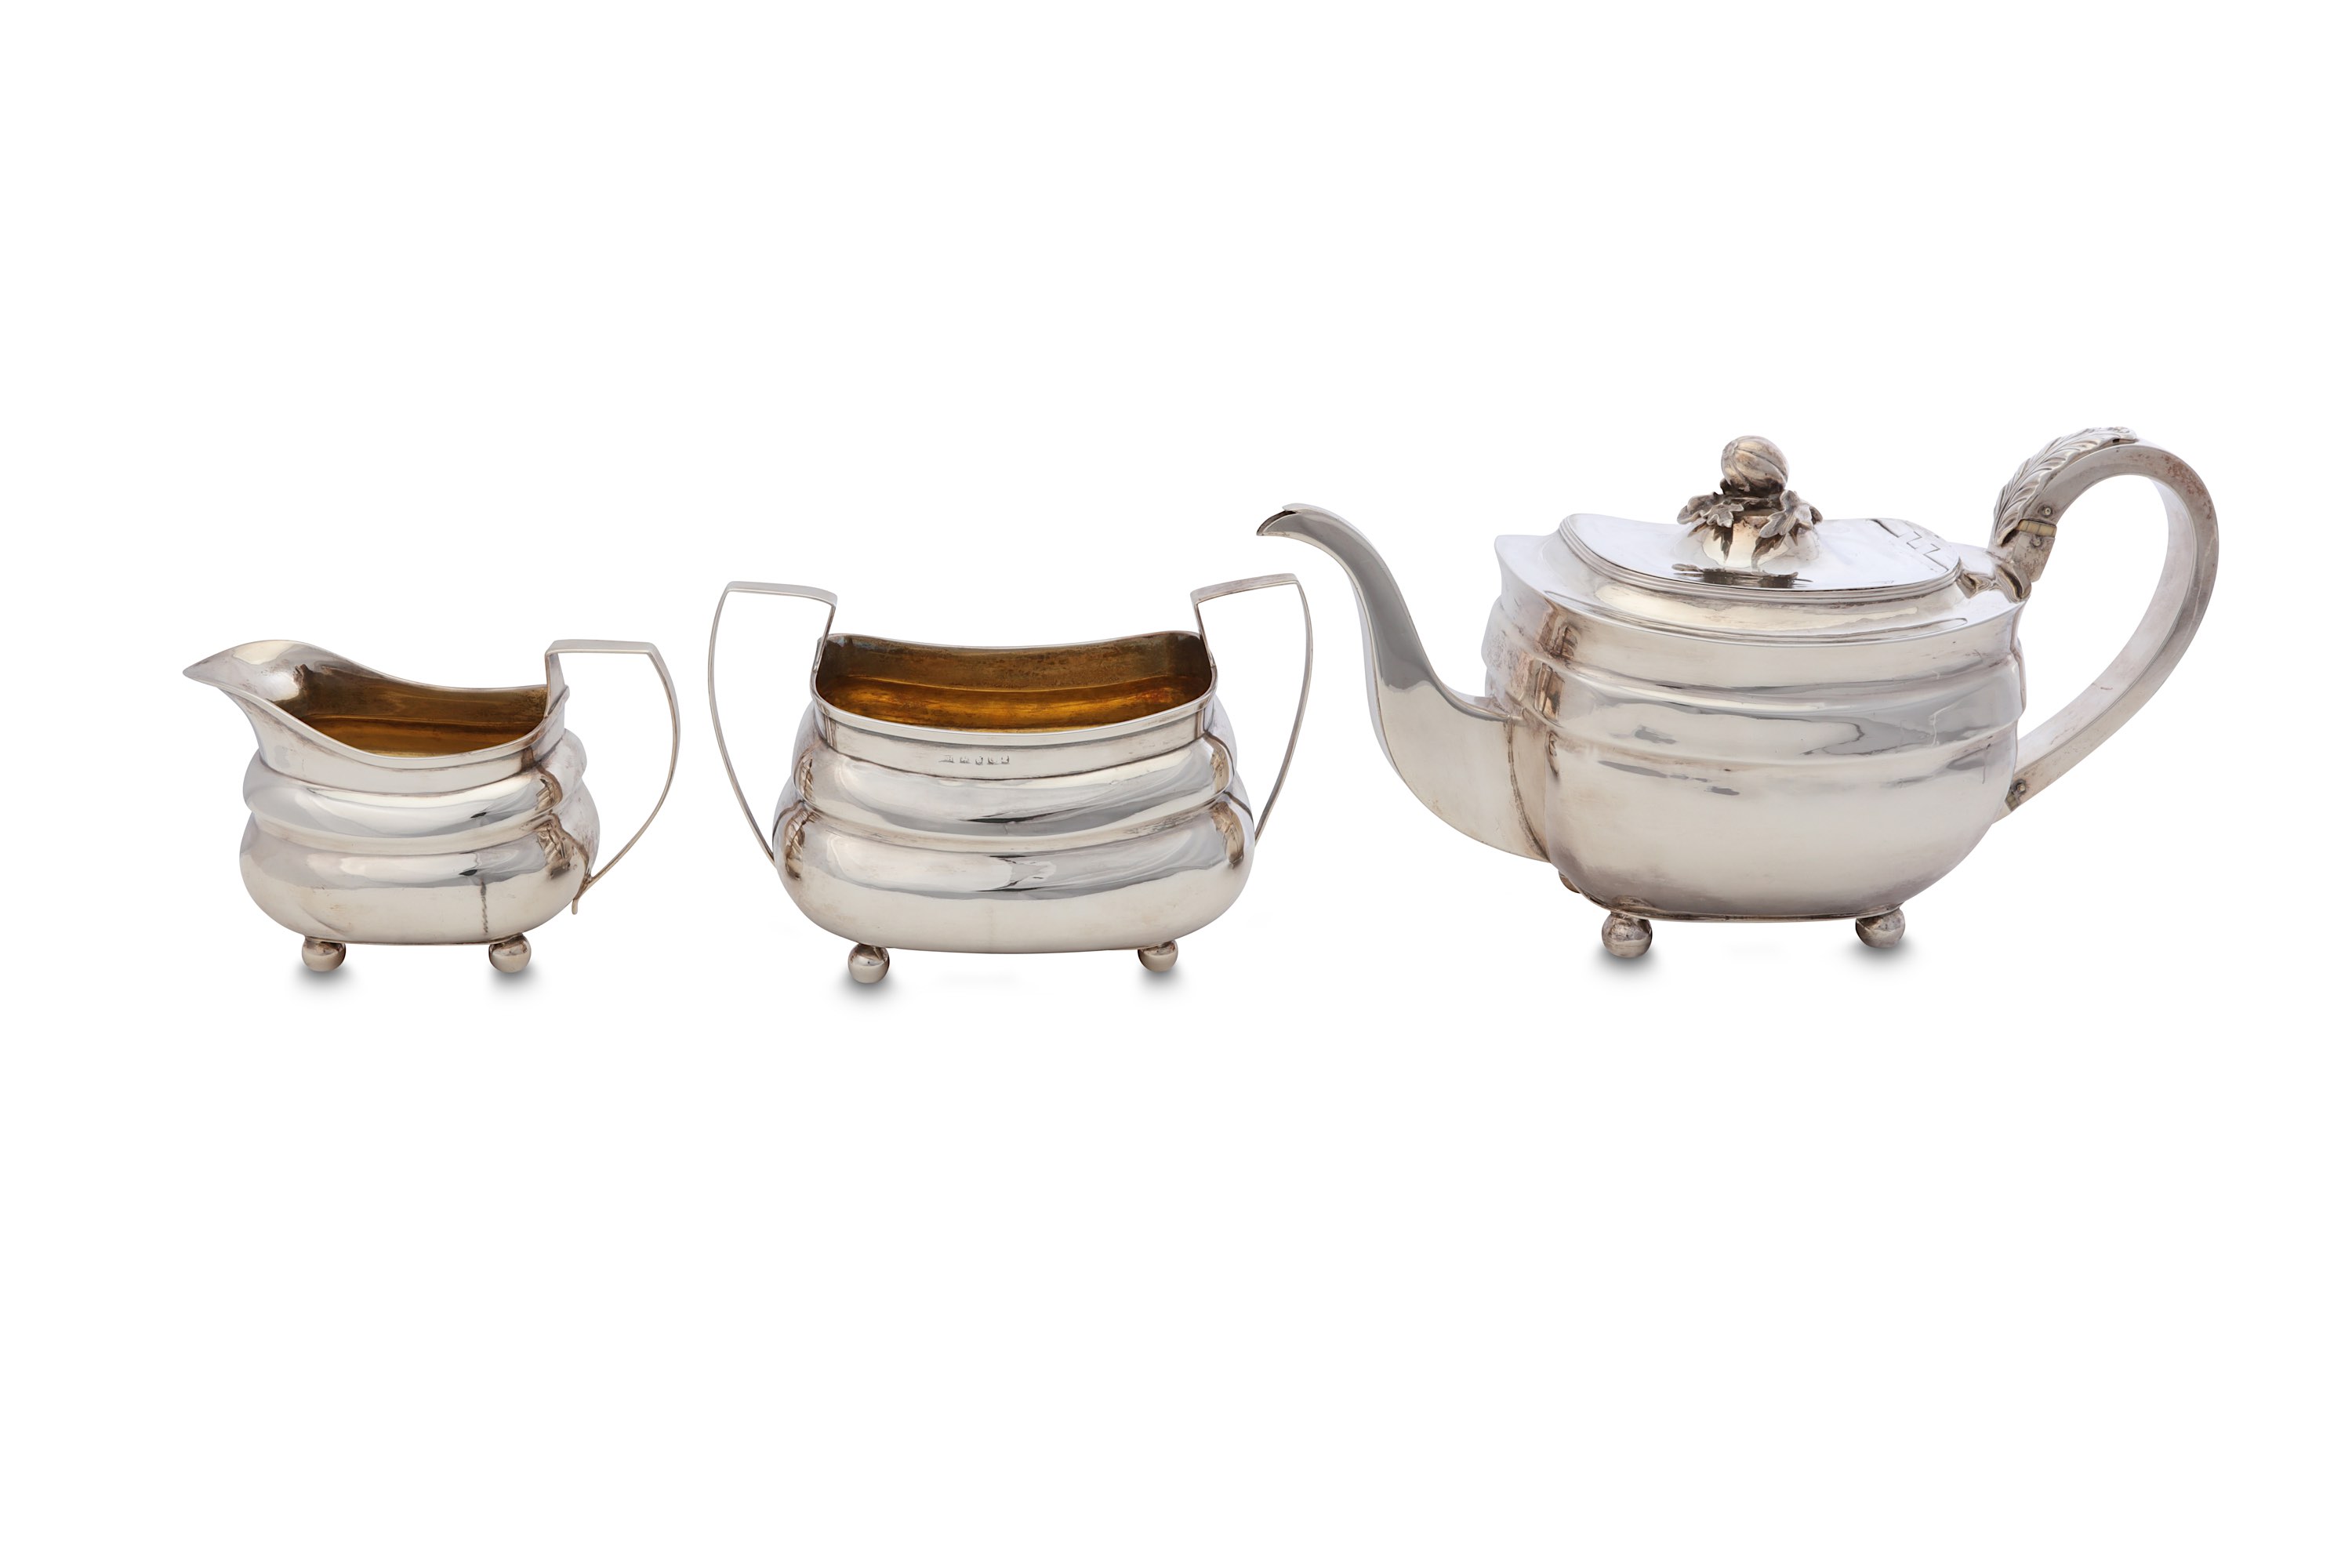 A matched George III antique sterling silver tea service, the teapot London 1807 by William Bennett